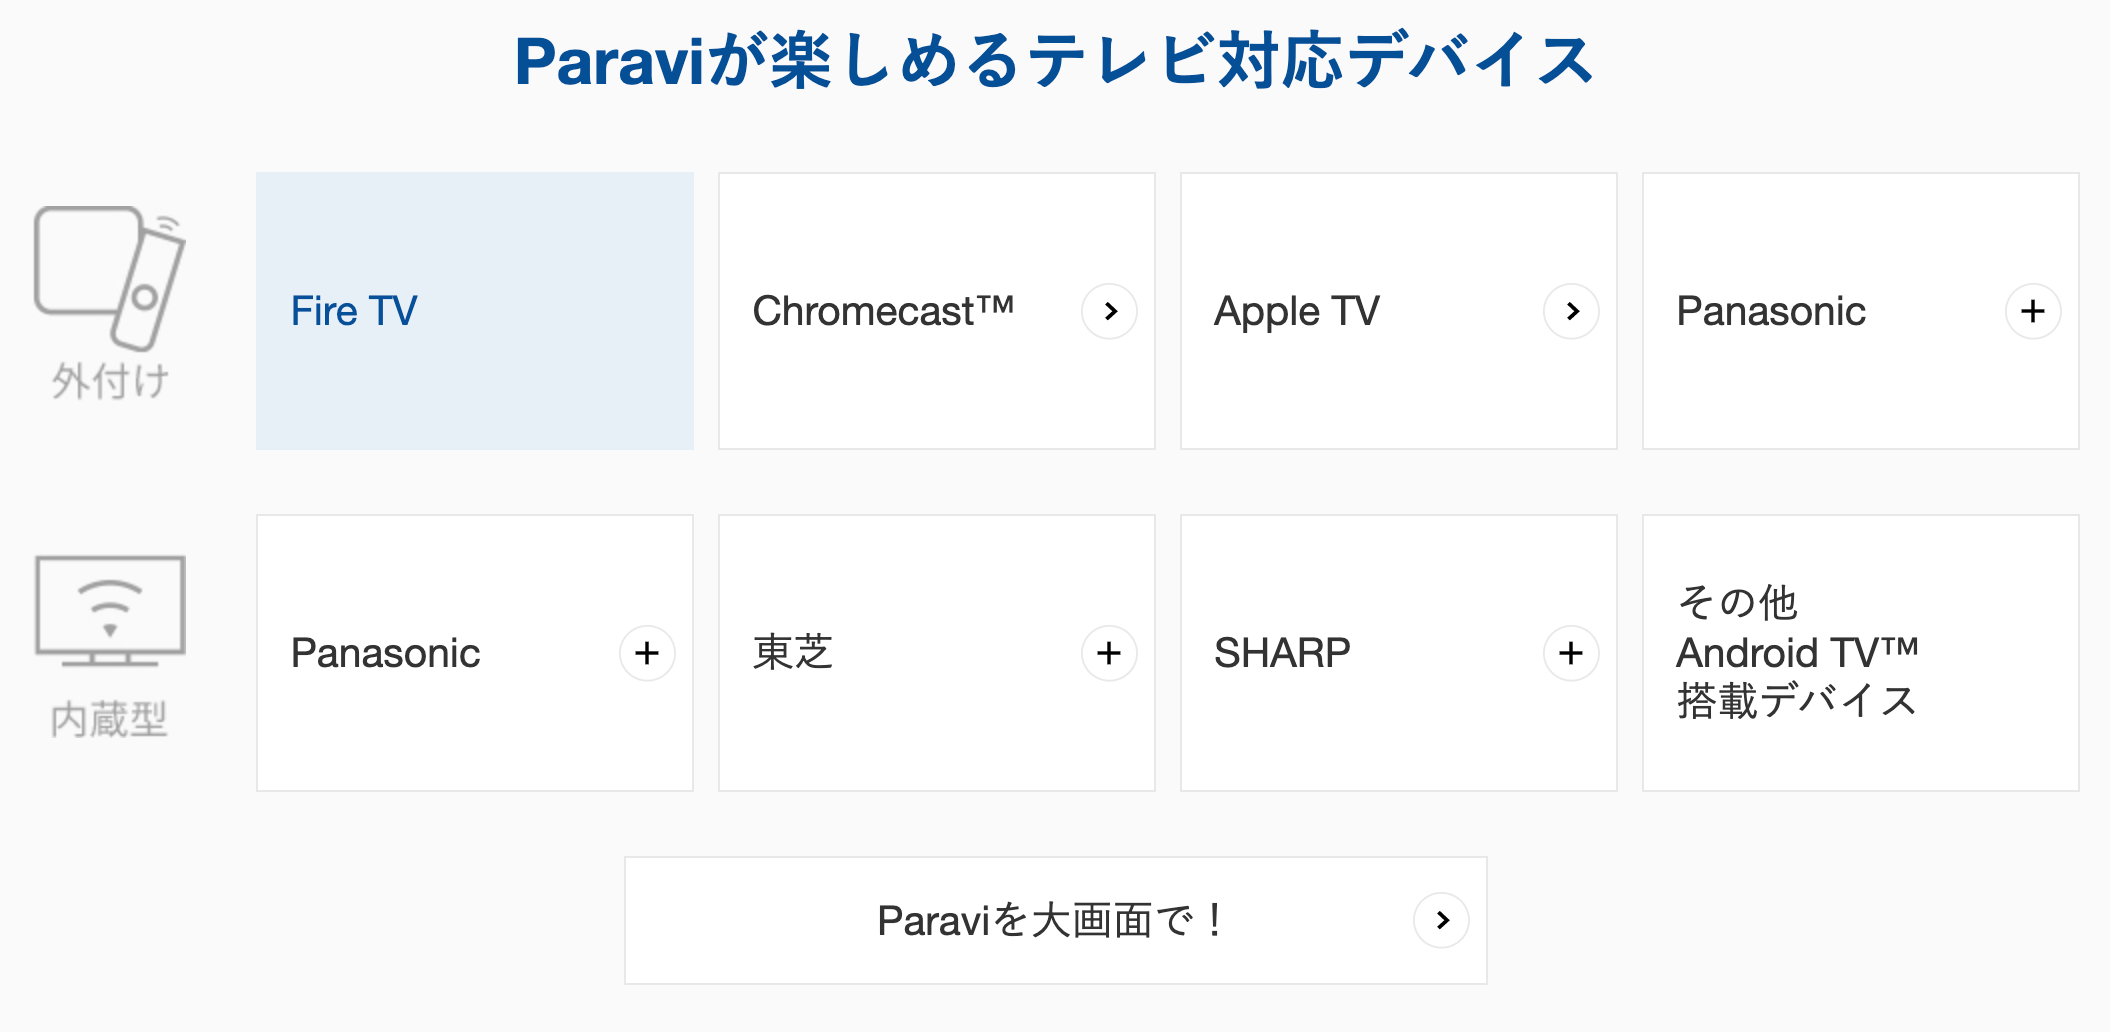 Paravi Fire TV android TV